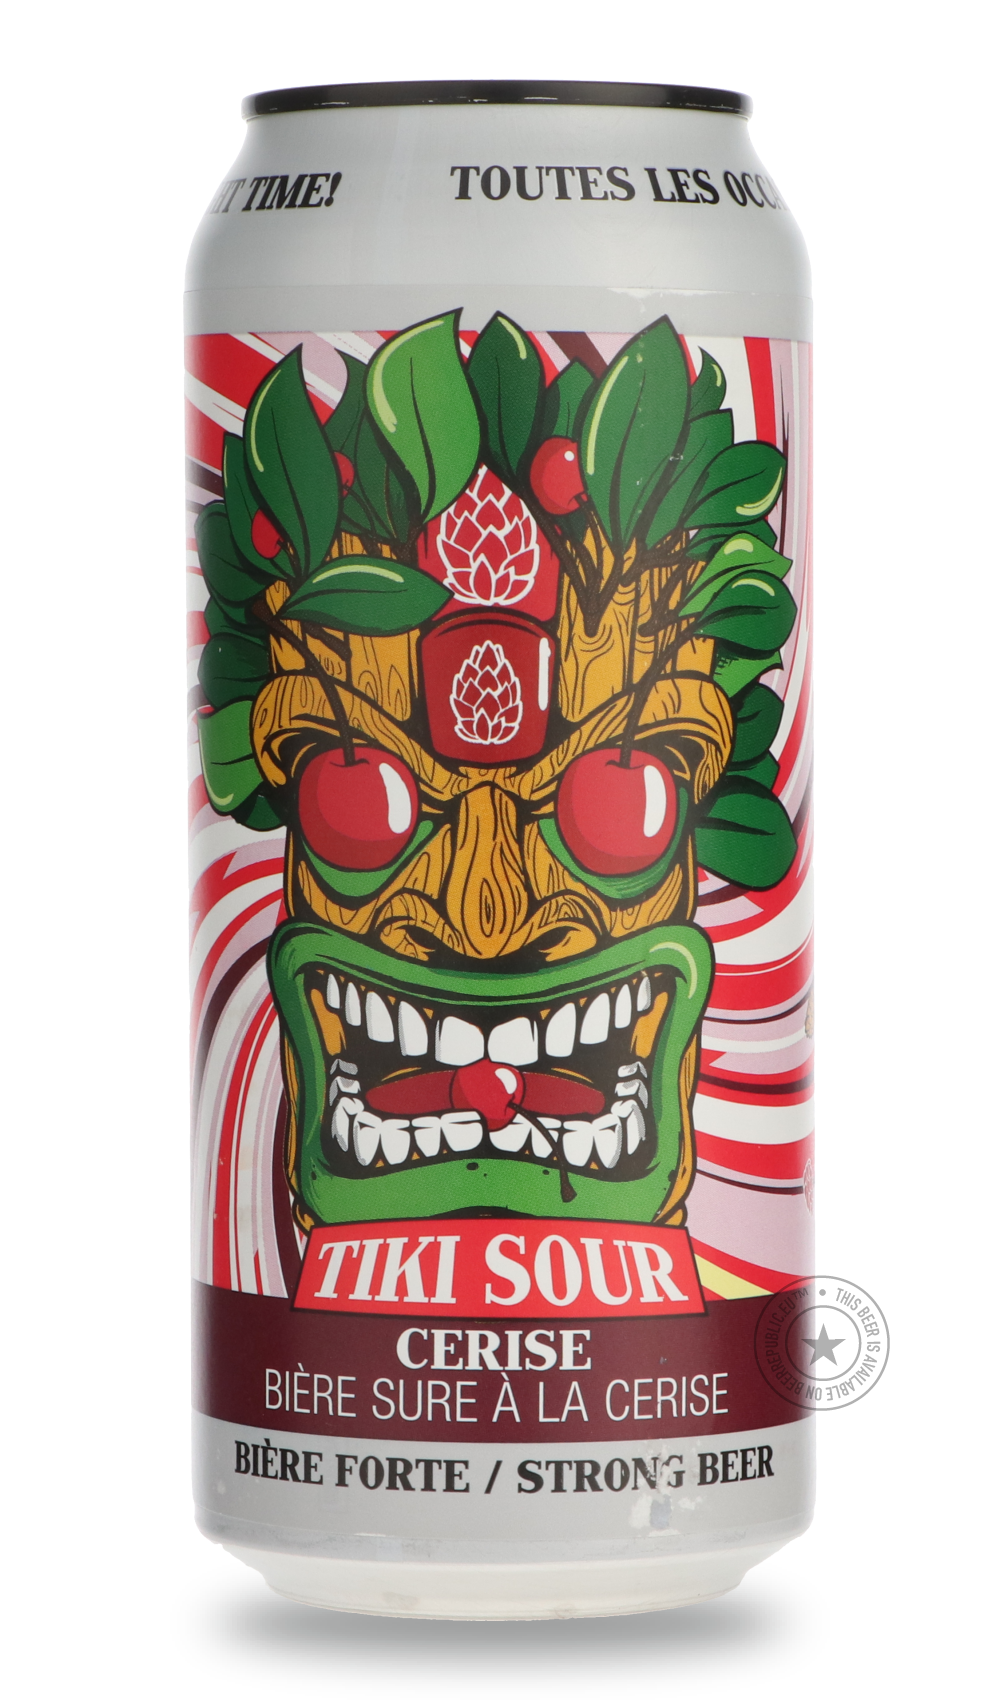 -Lagabière- Tiki Sour: Cerise-Sour / Wild & Fruity- Only @ Beer Republic - The best online beer store for American & Canadian craft beer - Buy beer online from the USA and Canada - Bier online kopen - Amerikaans bier kopen - Craft beer store - Craft beer kopen - Amerikanisch bier kaufen - Bier online kaufen - Acheter biere online - IPA - Stout - Porter - New England IPA - Hazy IPA - Imperial Stout - Barrel Aged - Barrel Aged Imperial Stout - Brown - Dark beer - Blond - Blonde - Pilsner - Lager - Wheat - Wei